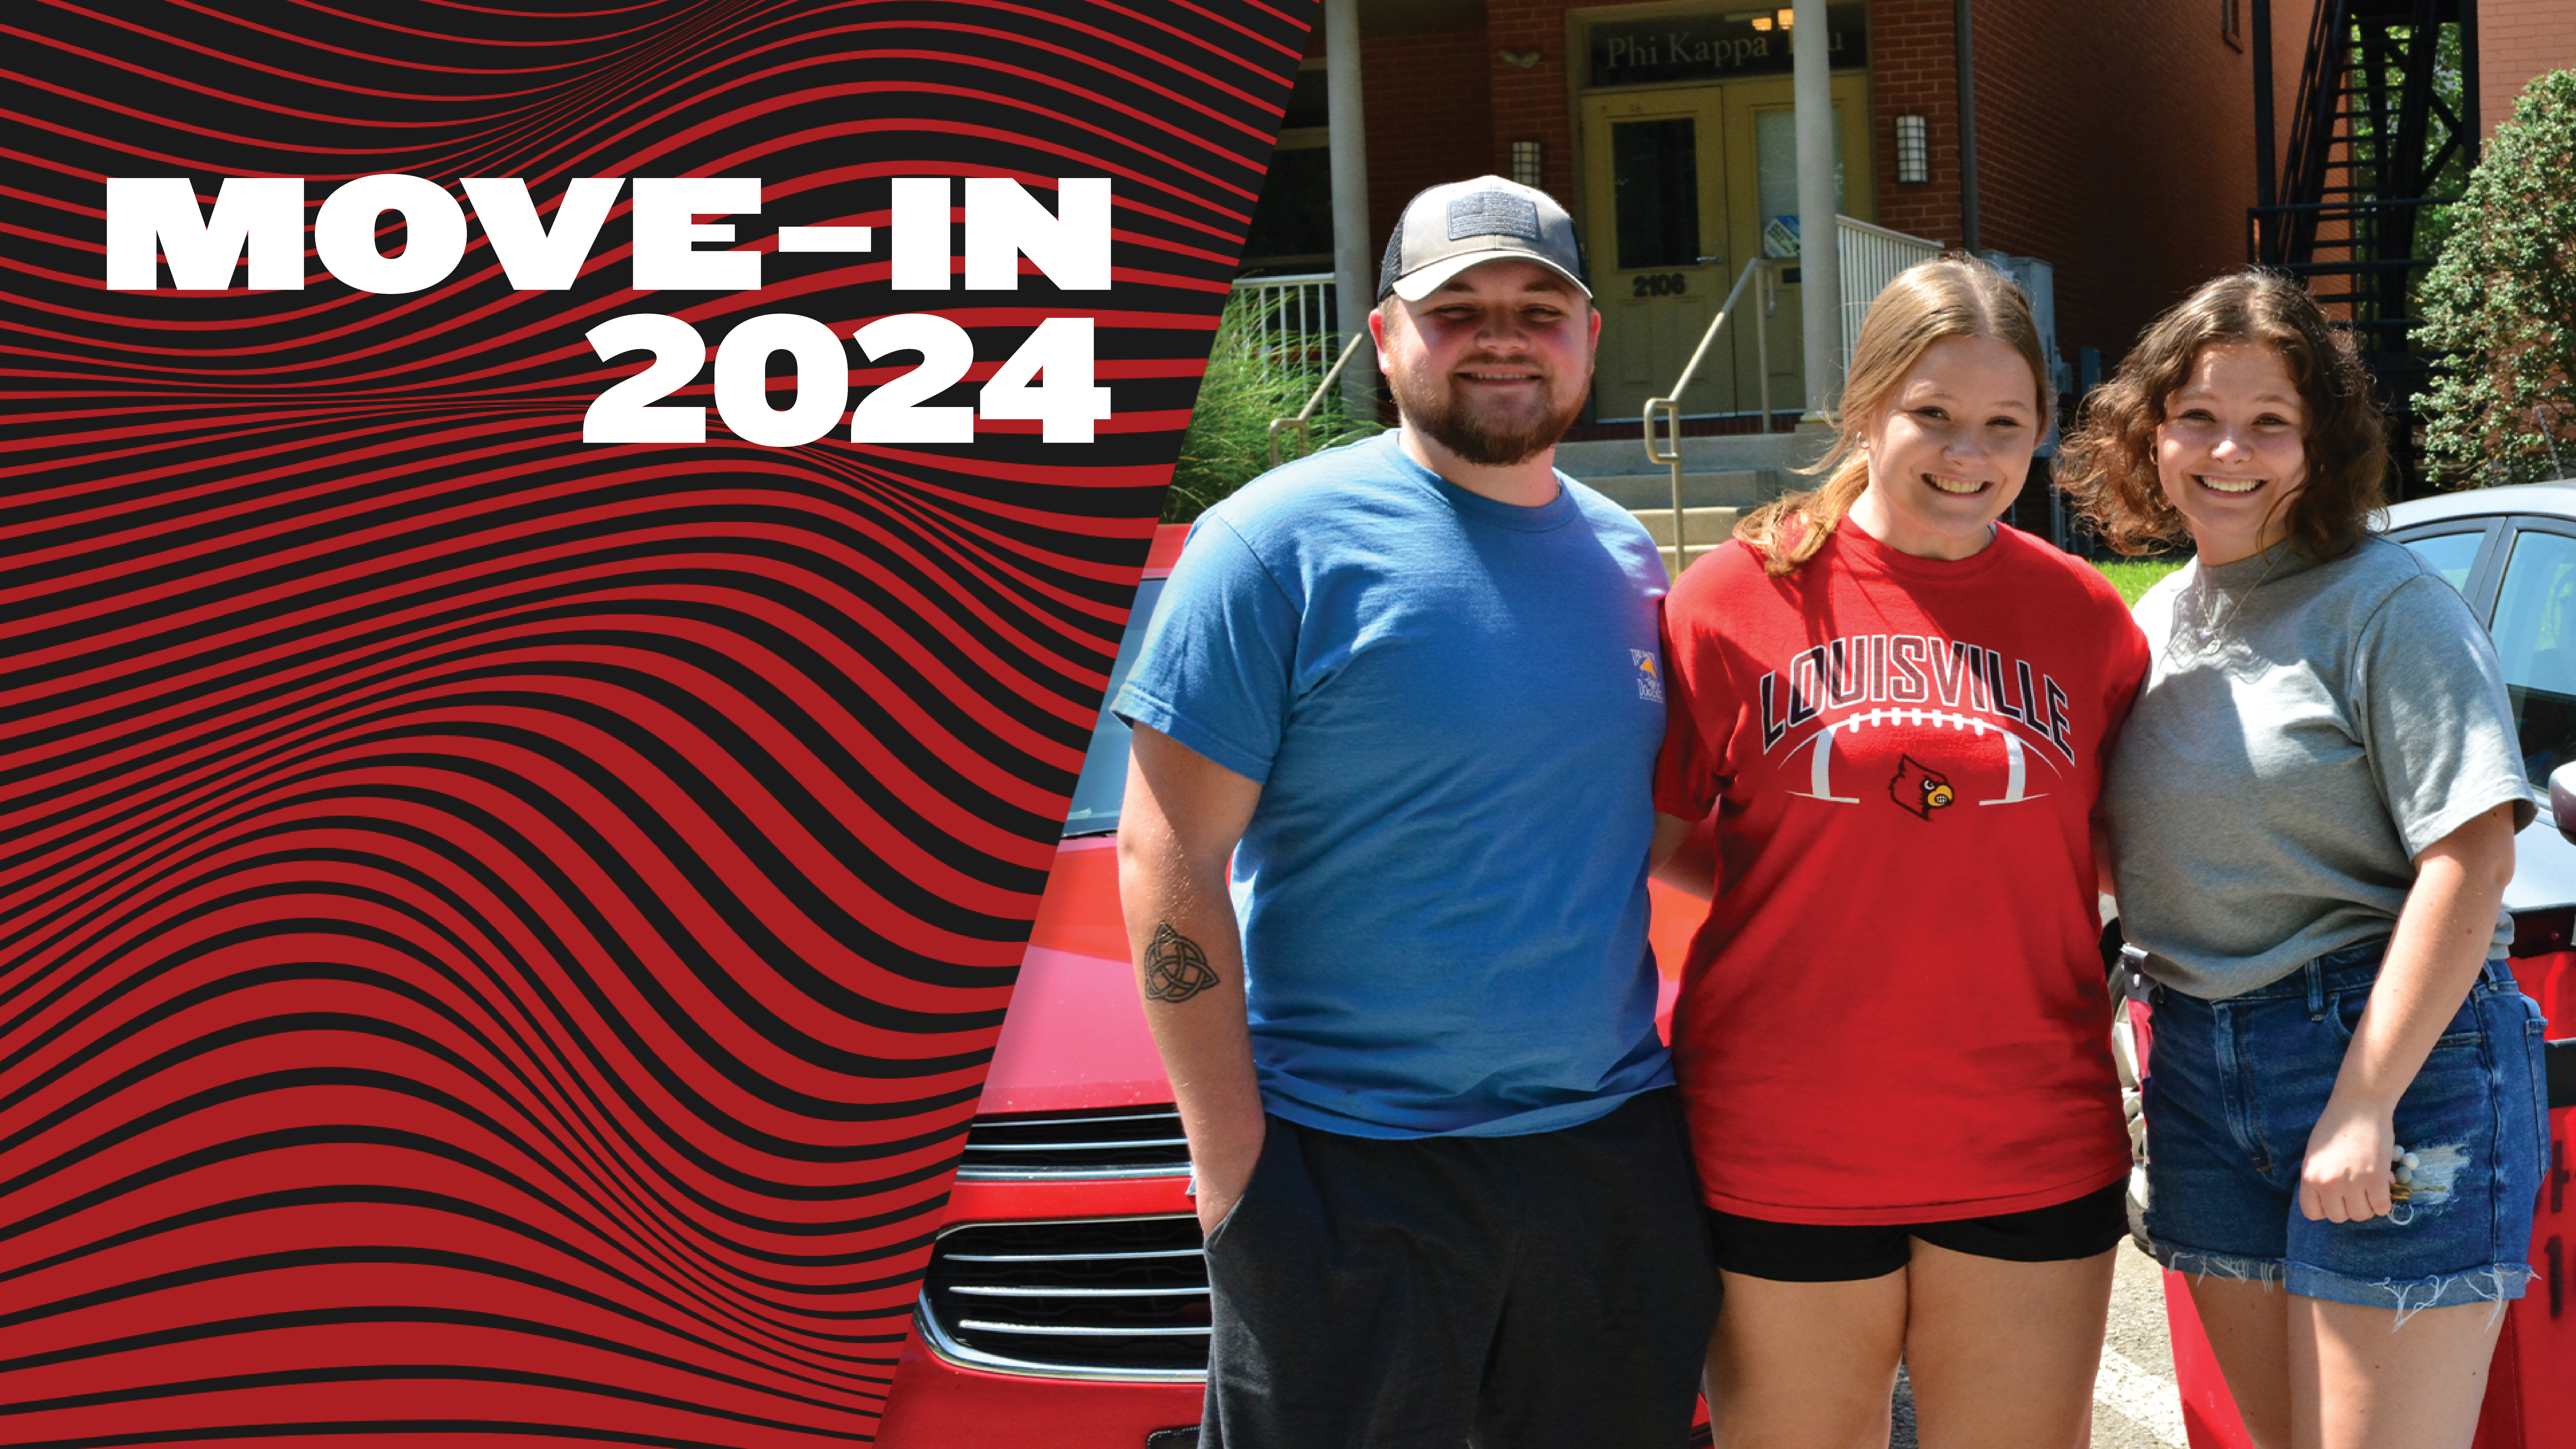 Move-In 2024 important dates